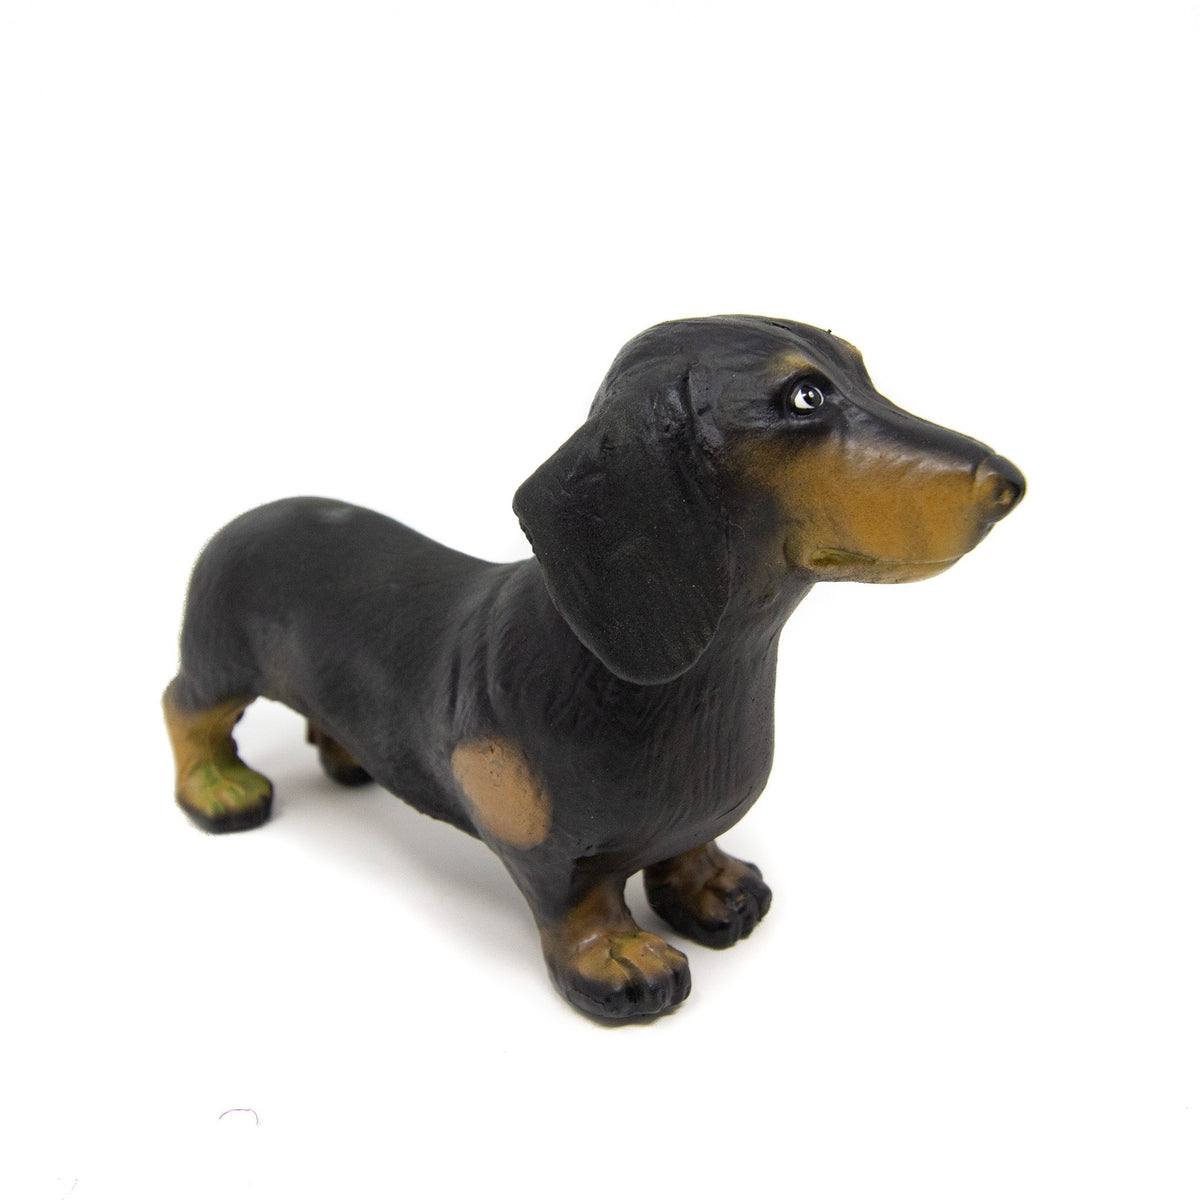 Natural Rubber Toy Dachshund - Rubber Dachshund | Natural Rubber Toys